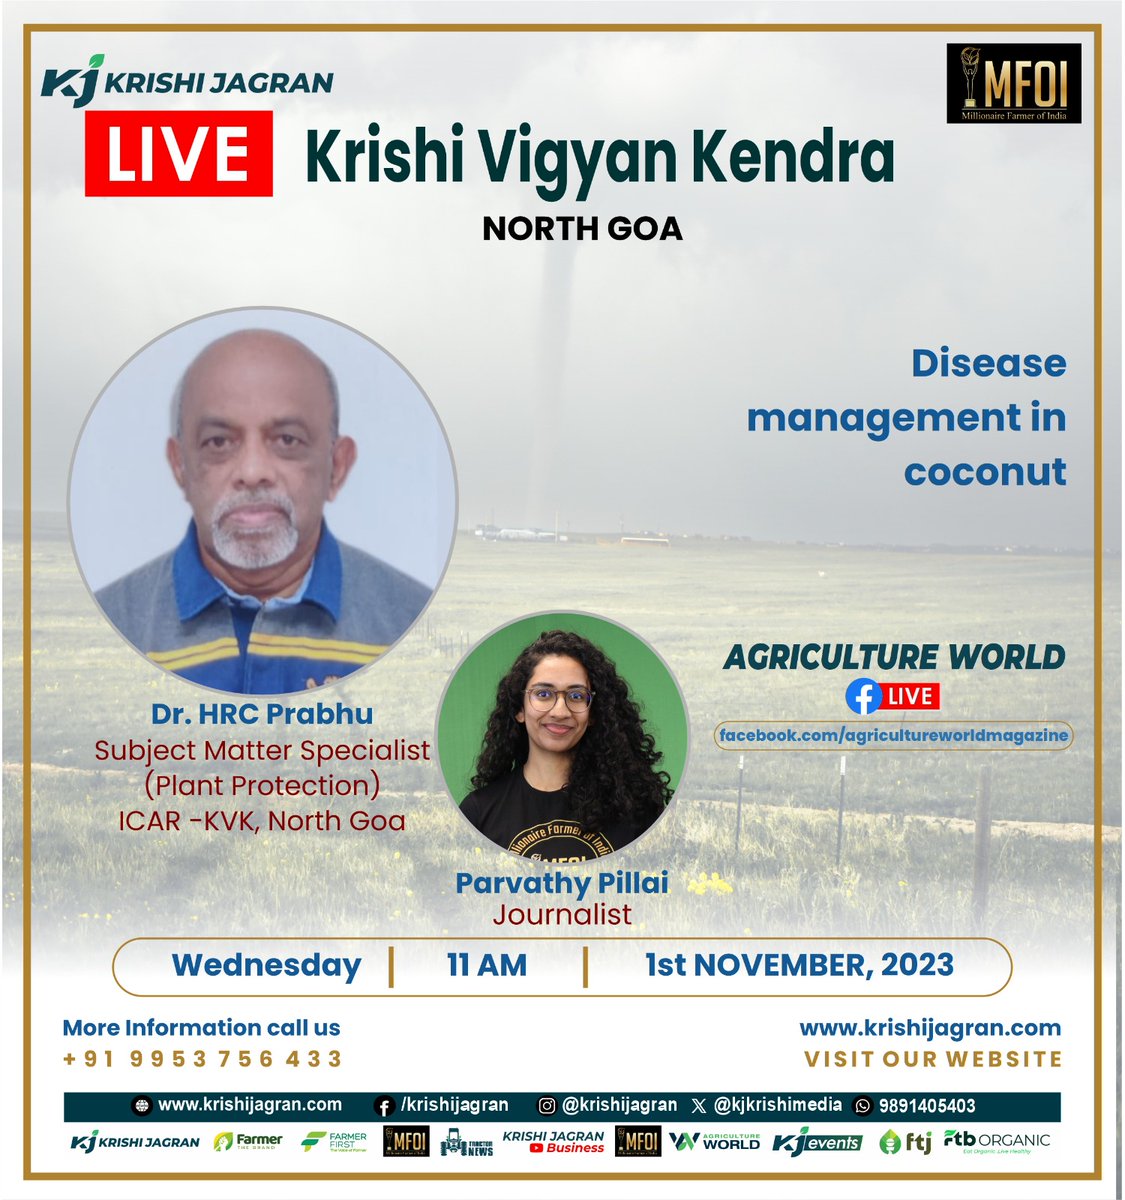 Join us live on Facebook on #diseasemanagement in #coconut by Krishi Vigyan Kendra on November 1, 2023, at 11:00 AM and witness the future of #farming!

To watch live, follow our page: facebook.com/agriculturewor…

#FacebookLive #KrishiVigyanKendra #livewebinar